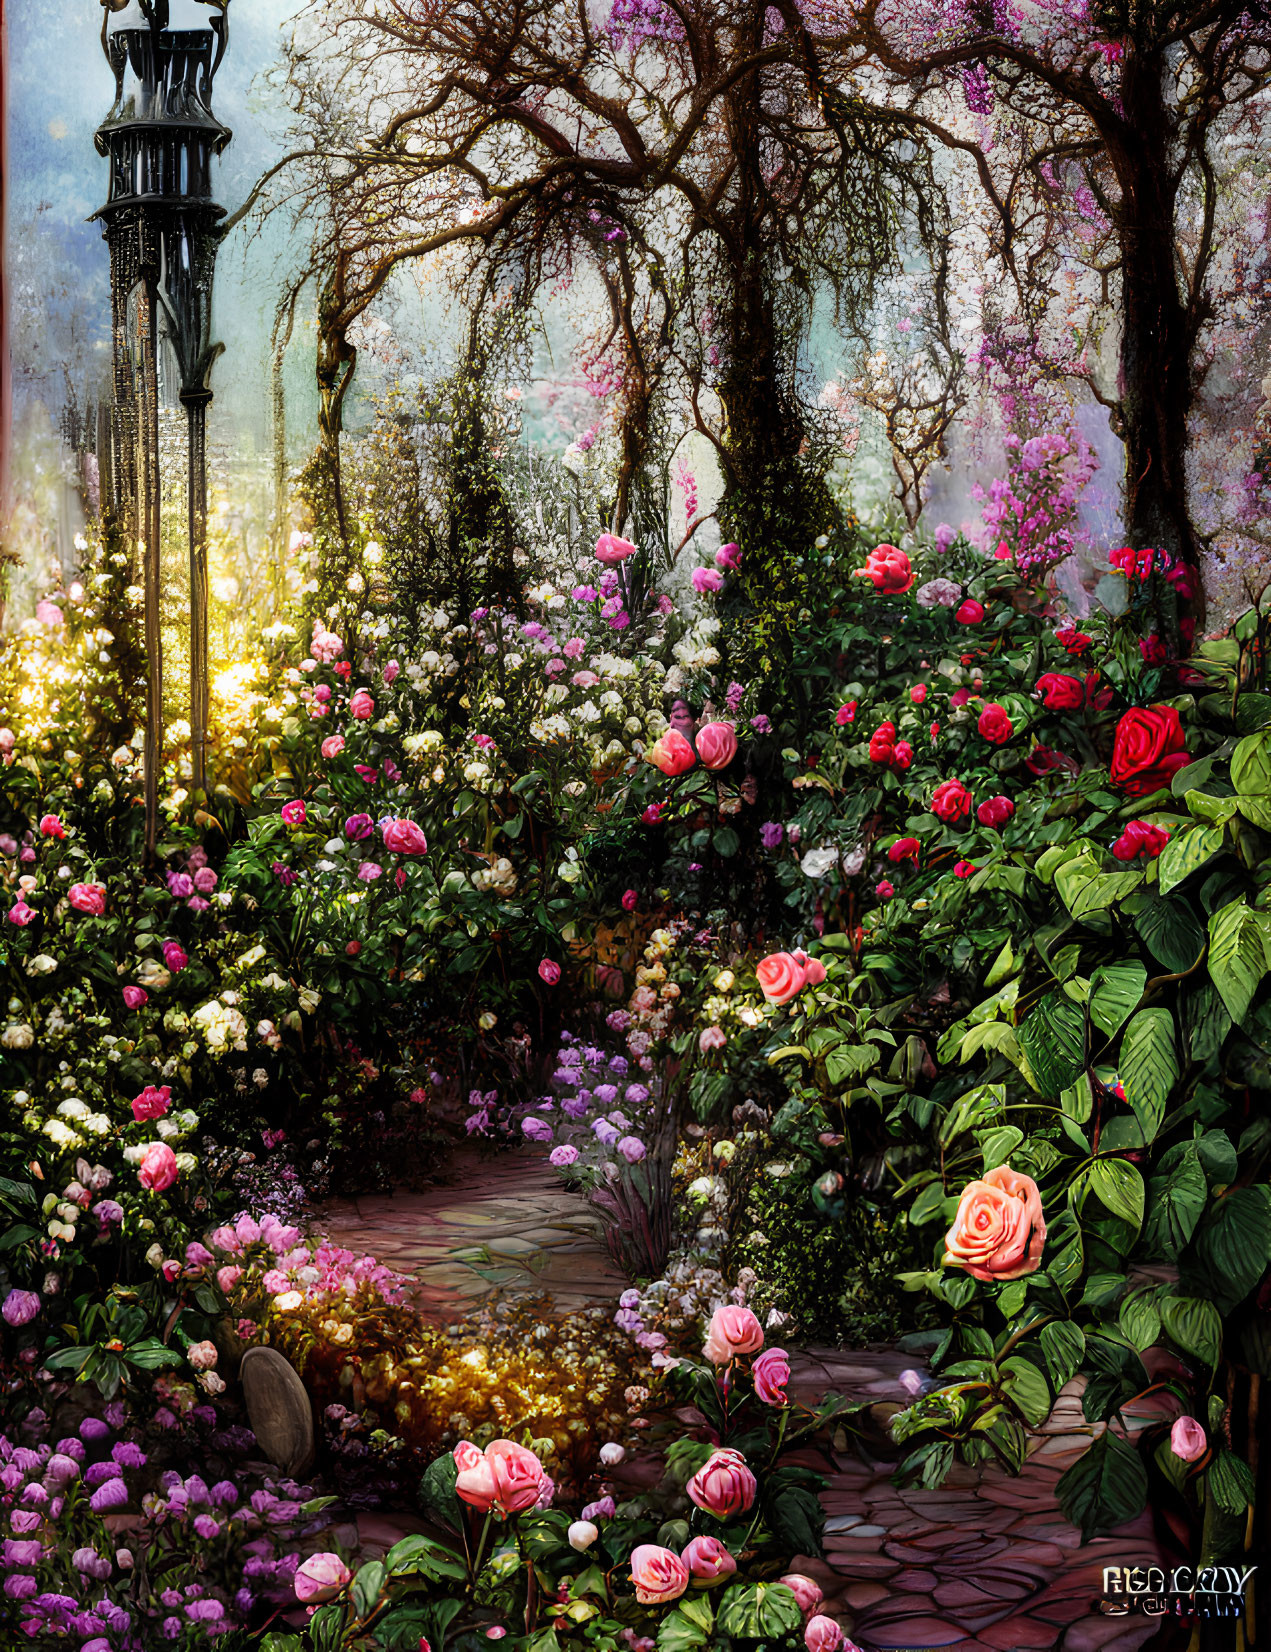 Enchanting garden pathway with vibrant roses and vintage lamp post